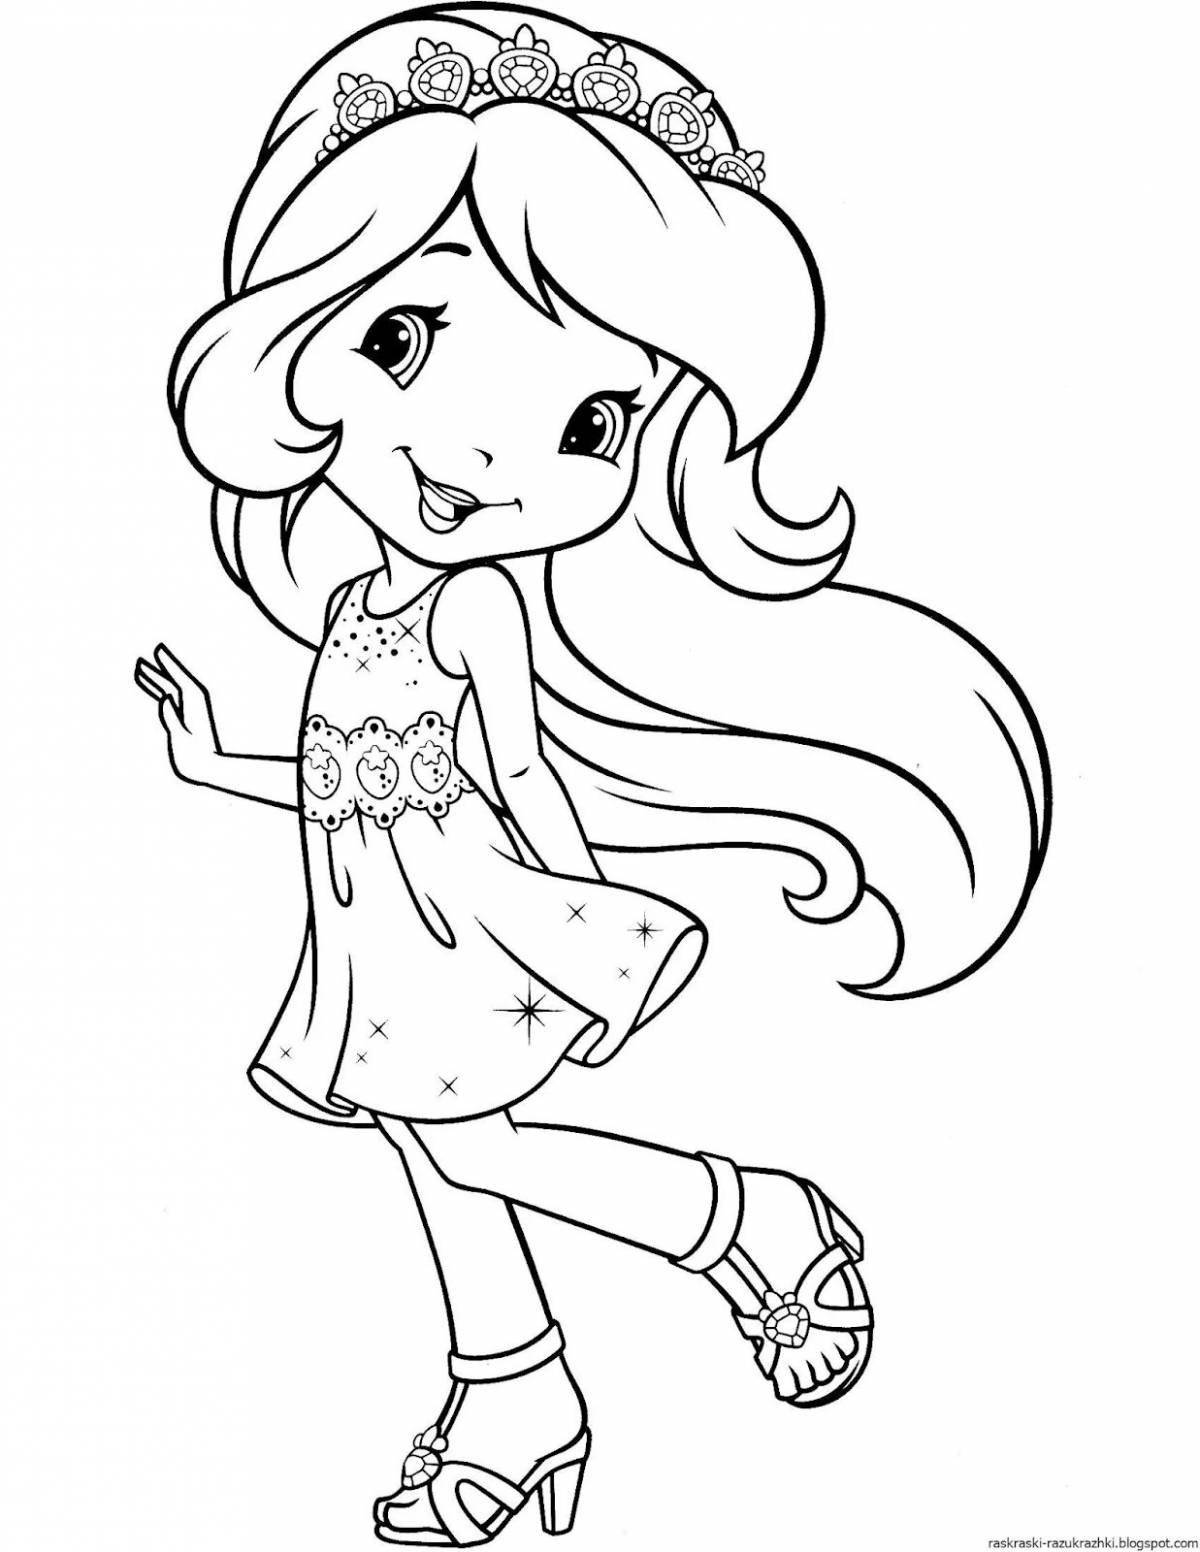 Awesome coloring pages popular with girls